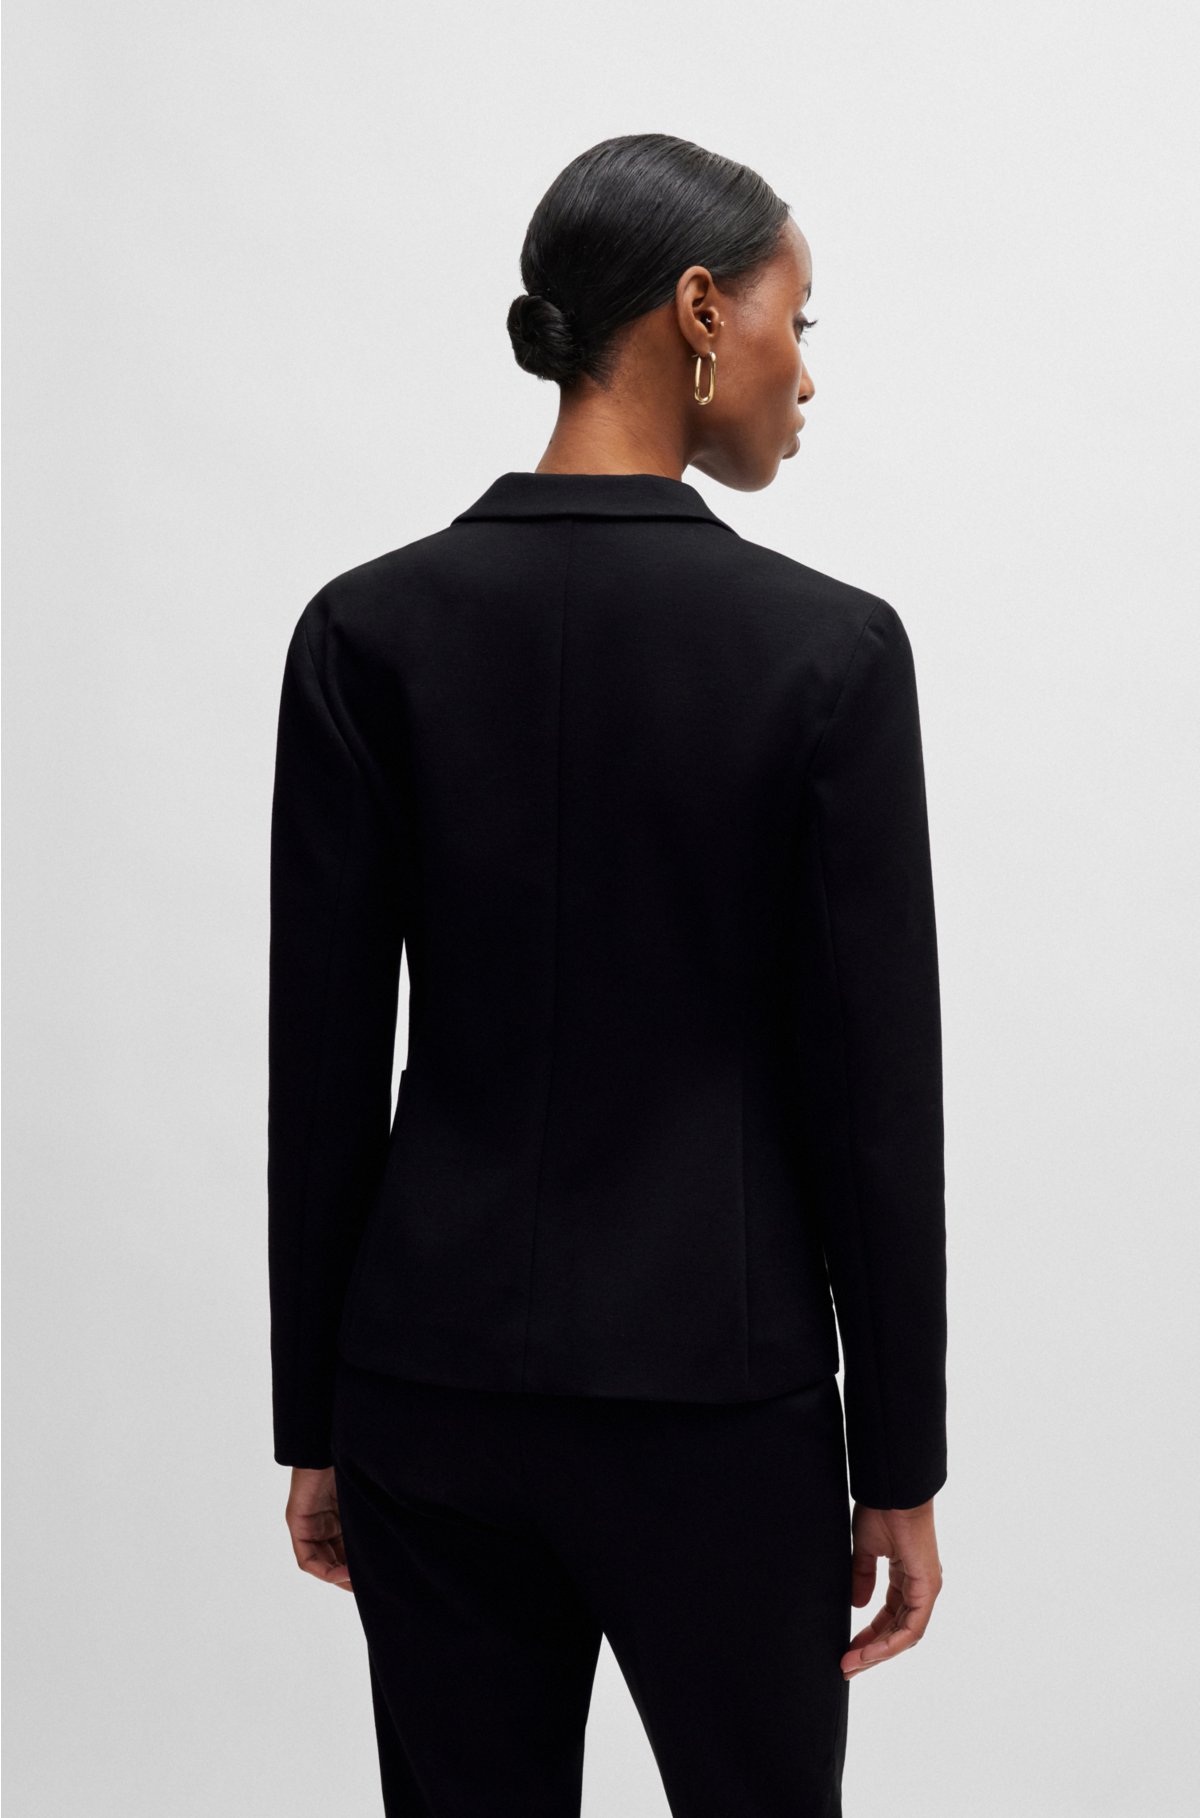 Extra-slim-fit jacket in stretch fabric, Black